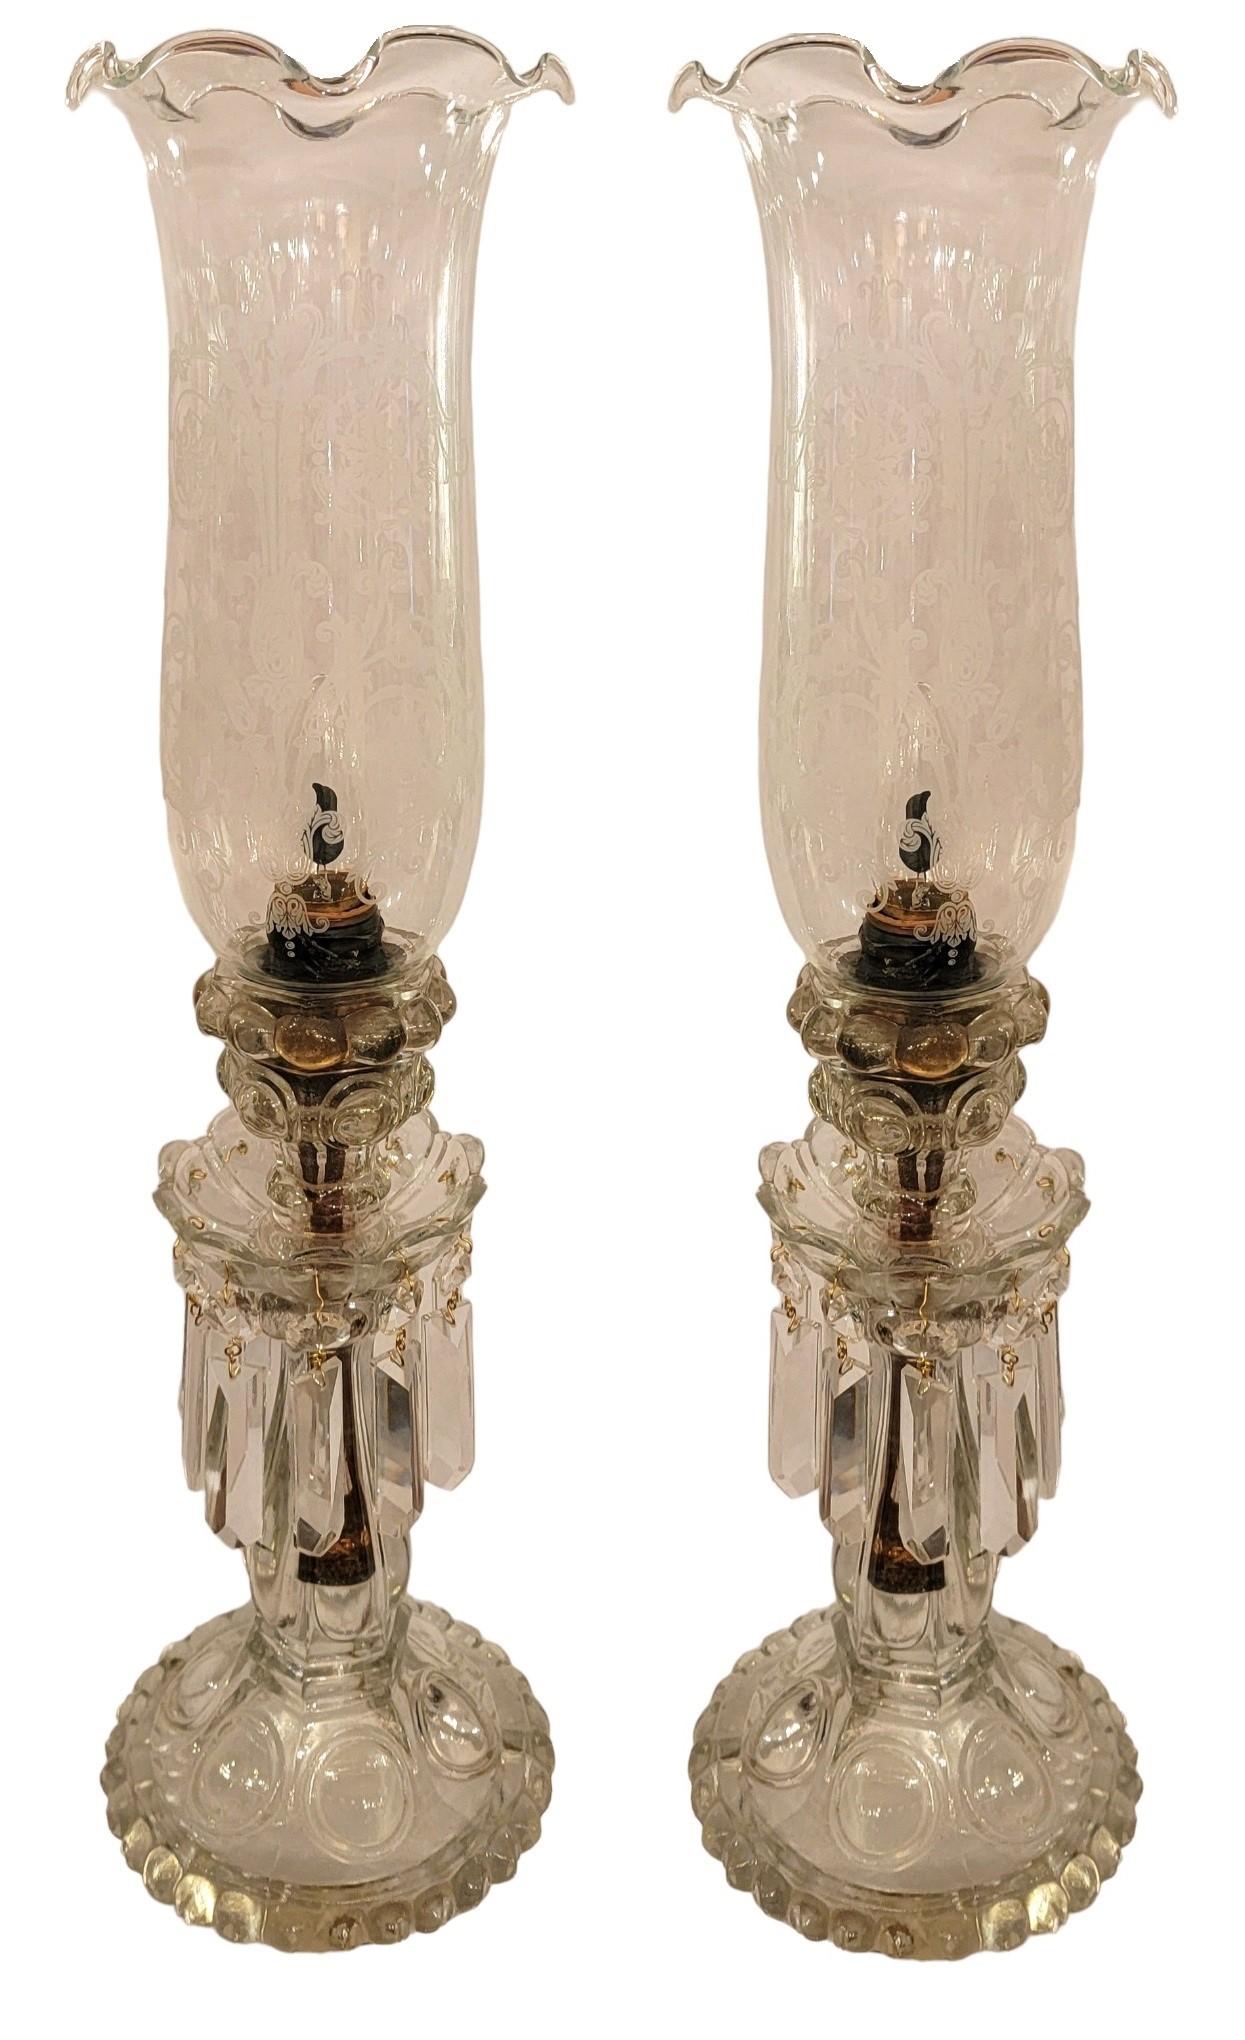 Pair of 1940s French Crystal Baccarat Style Table Lamps that may be transferred to candle holders. Wonderful crystals hanging from the cup surrounding the stem. The shades are etched glass shades. Great pairing.
Shades may be removed for transport.